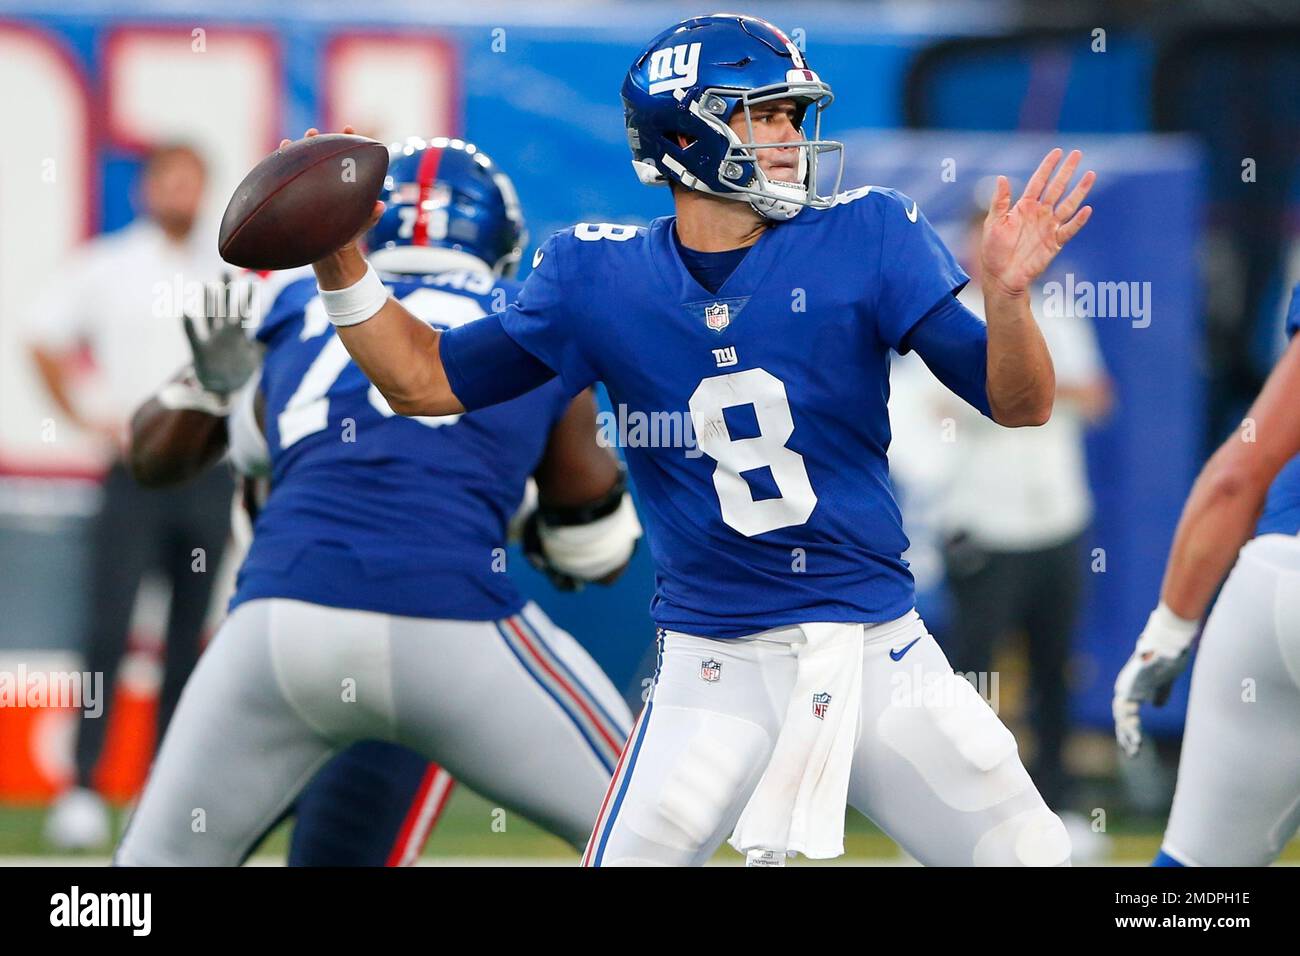 New York Giants quarterback Daniel Jones (8) throws a pass during the first half of an NFL preseason football game against the New England Patriots Sunday, Aug